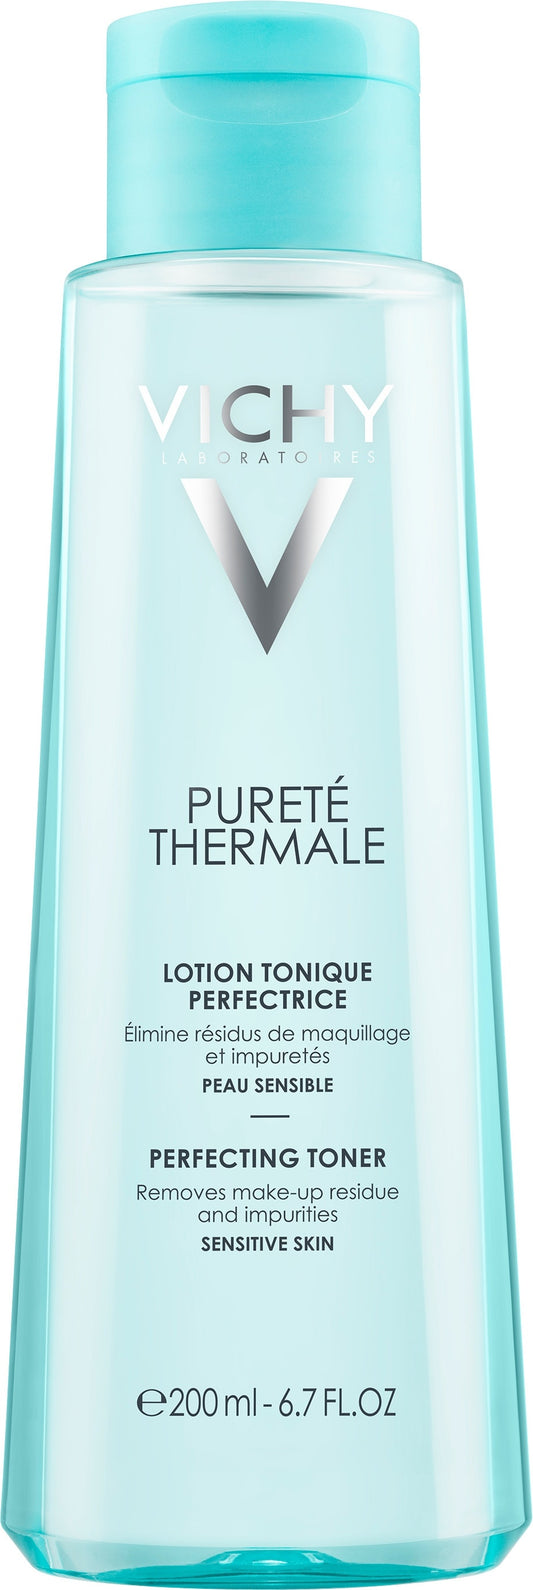 Vichy Purete Thermale Perfecting Toner - McCartans Pharmacy